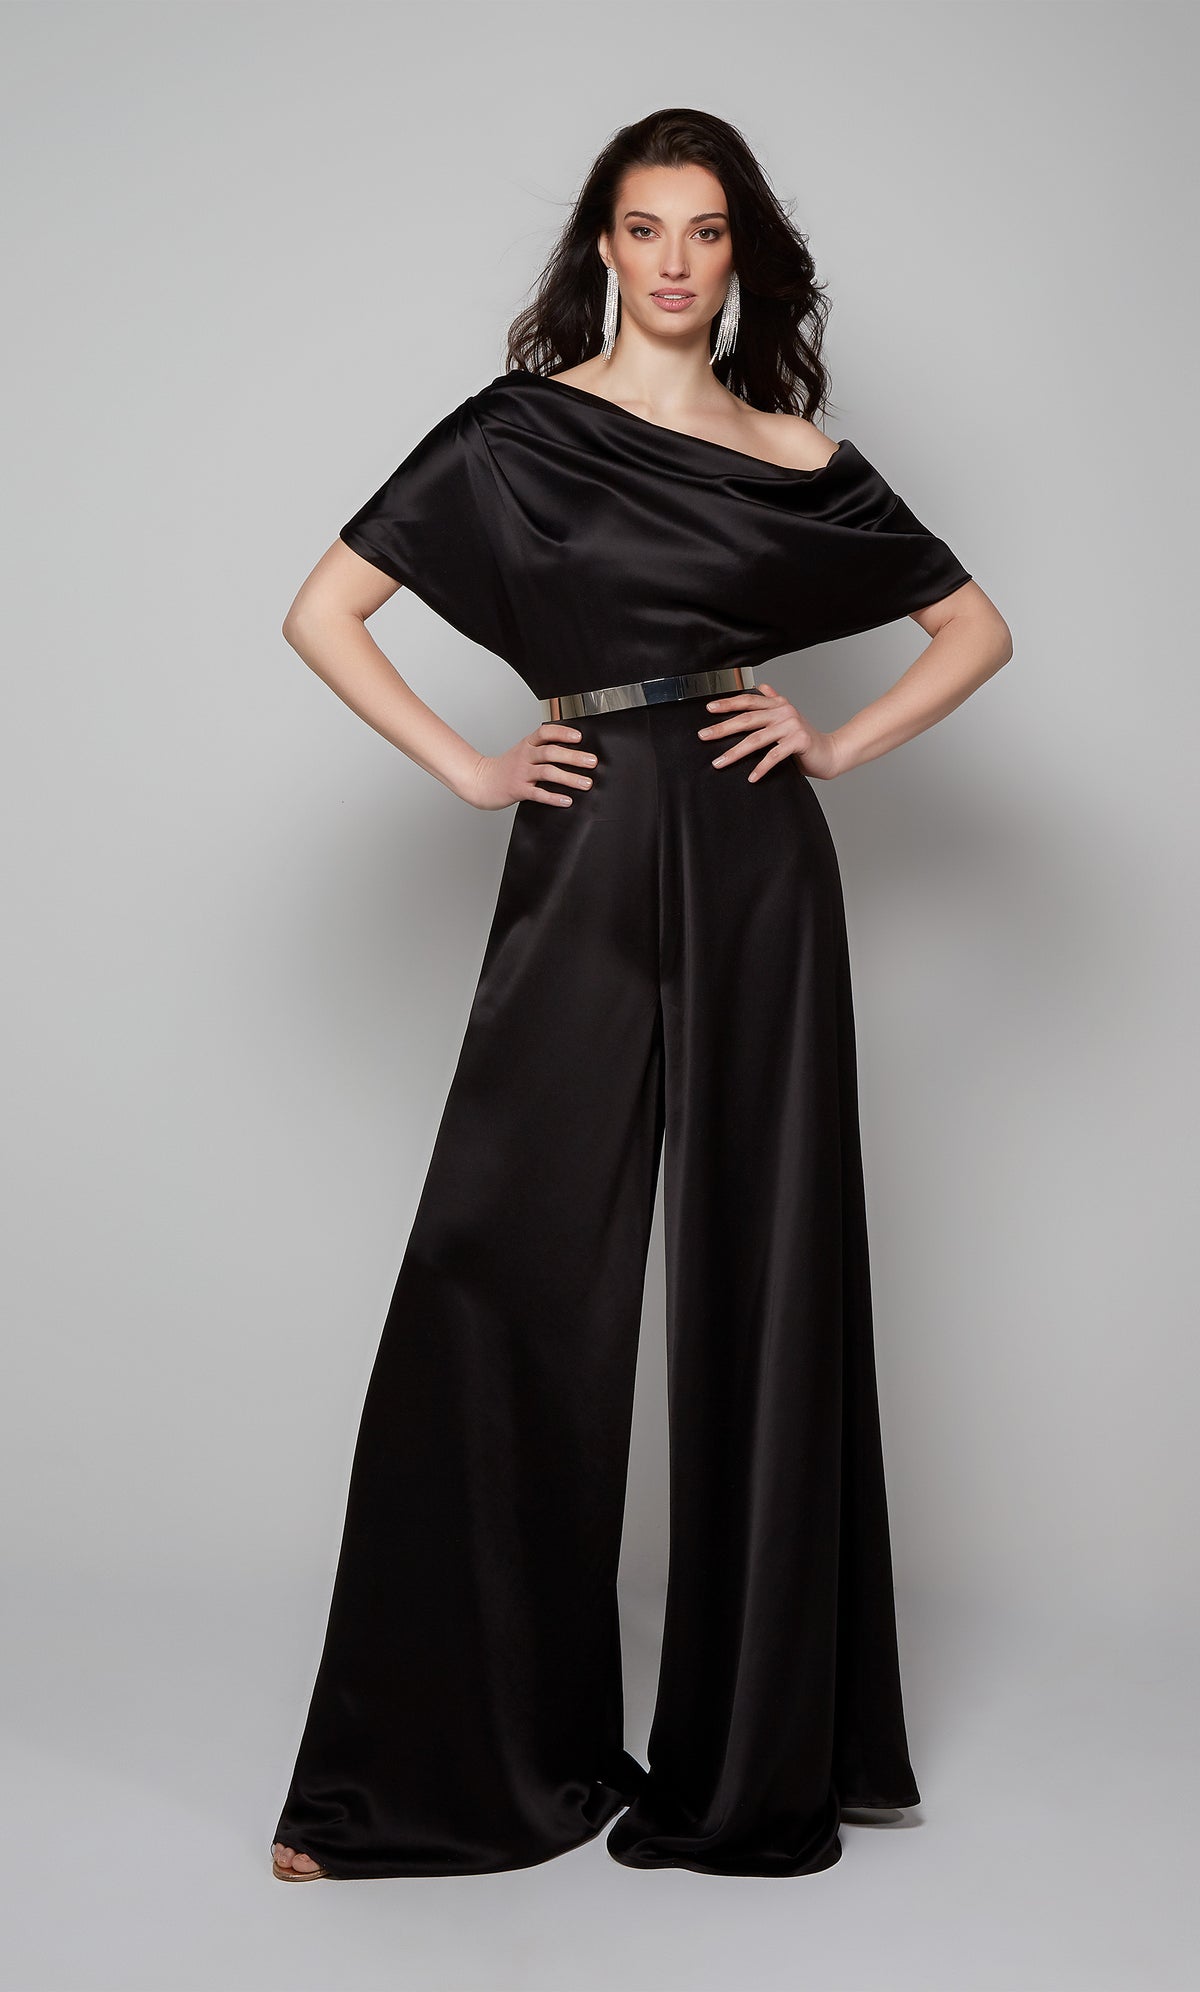 Elegant black jumpsuit with draped one shoulder bodice shown with silver belt. Belt not included with purchase.